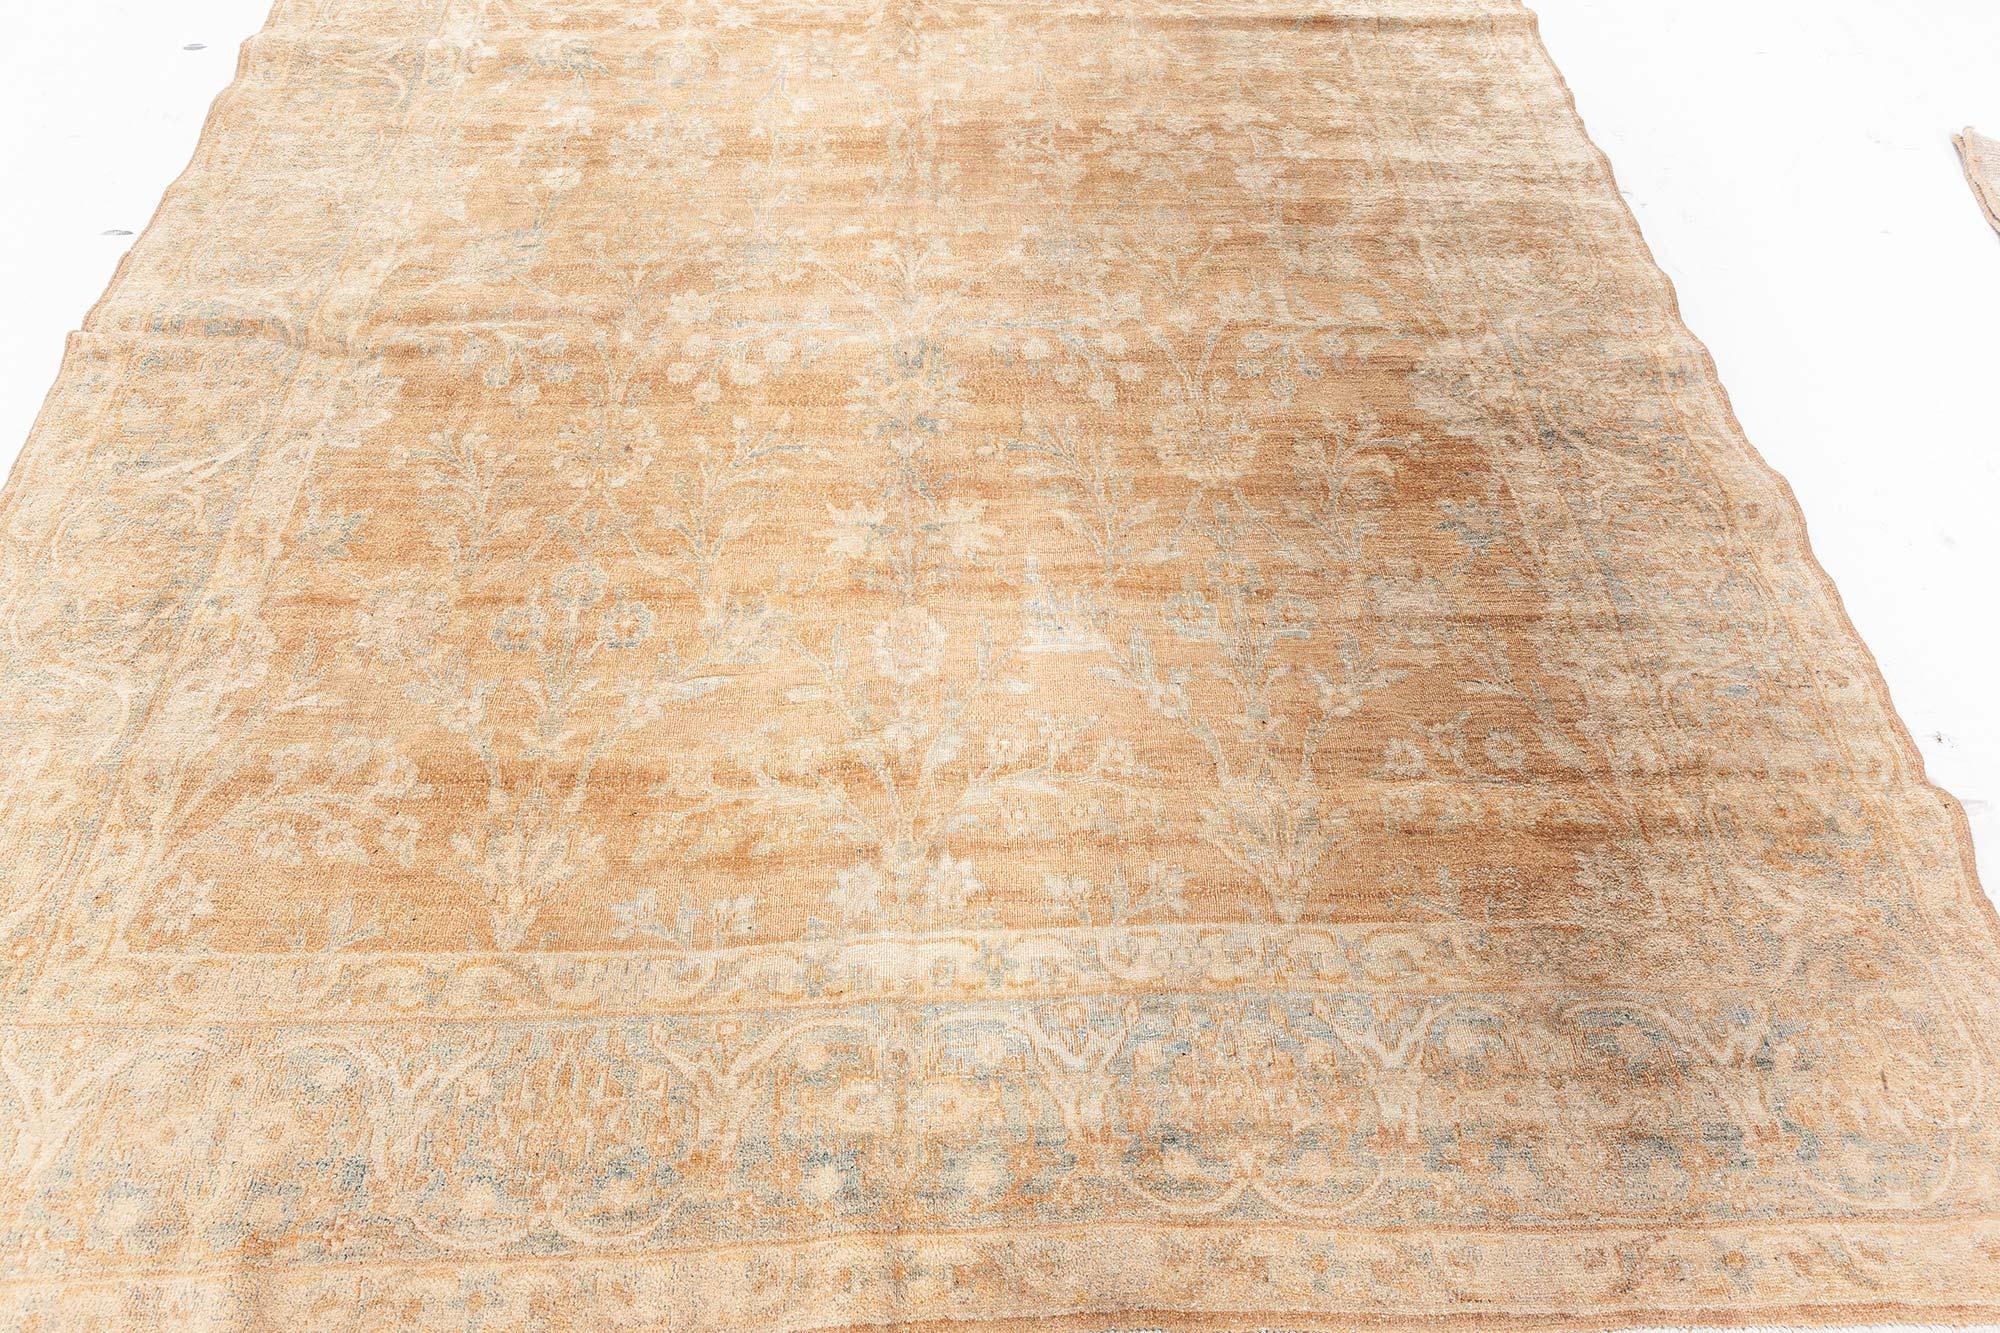 Antique Persian Tabriz Brown Handwoven Wool Carpet In Good Condition For Sale In New York, NY